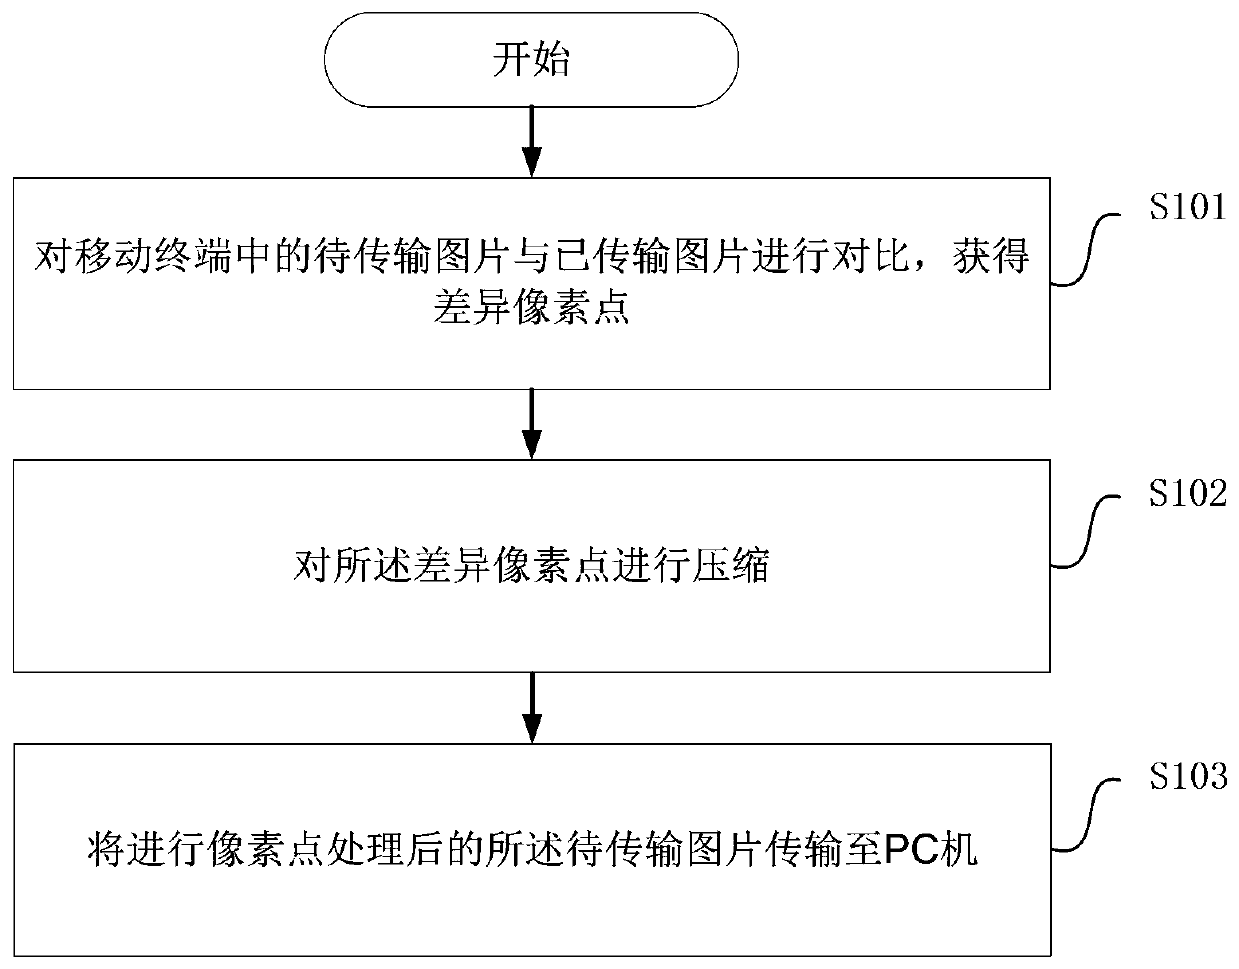 A high-speed synchronization method and system between a PC and a mobile terminal